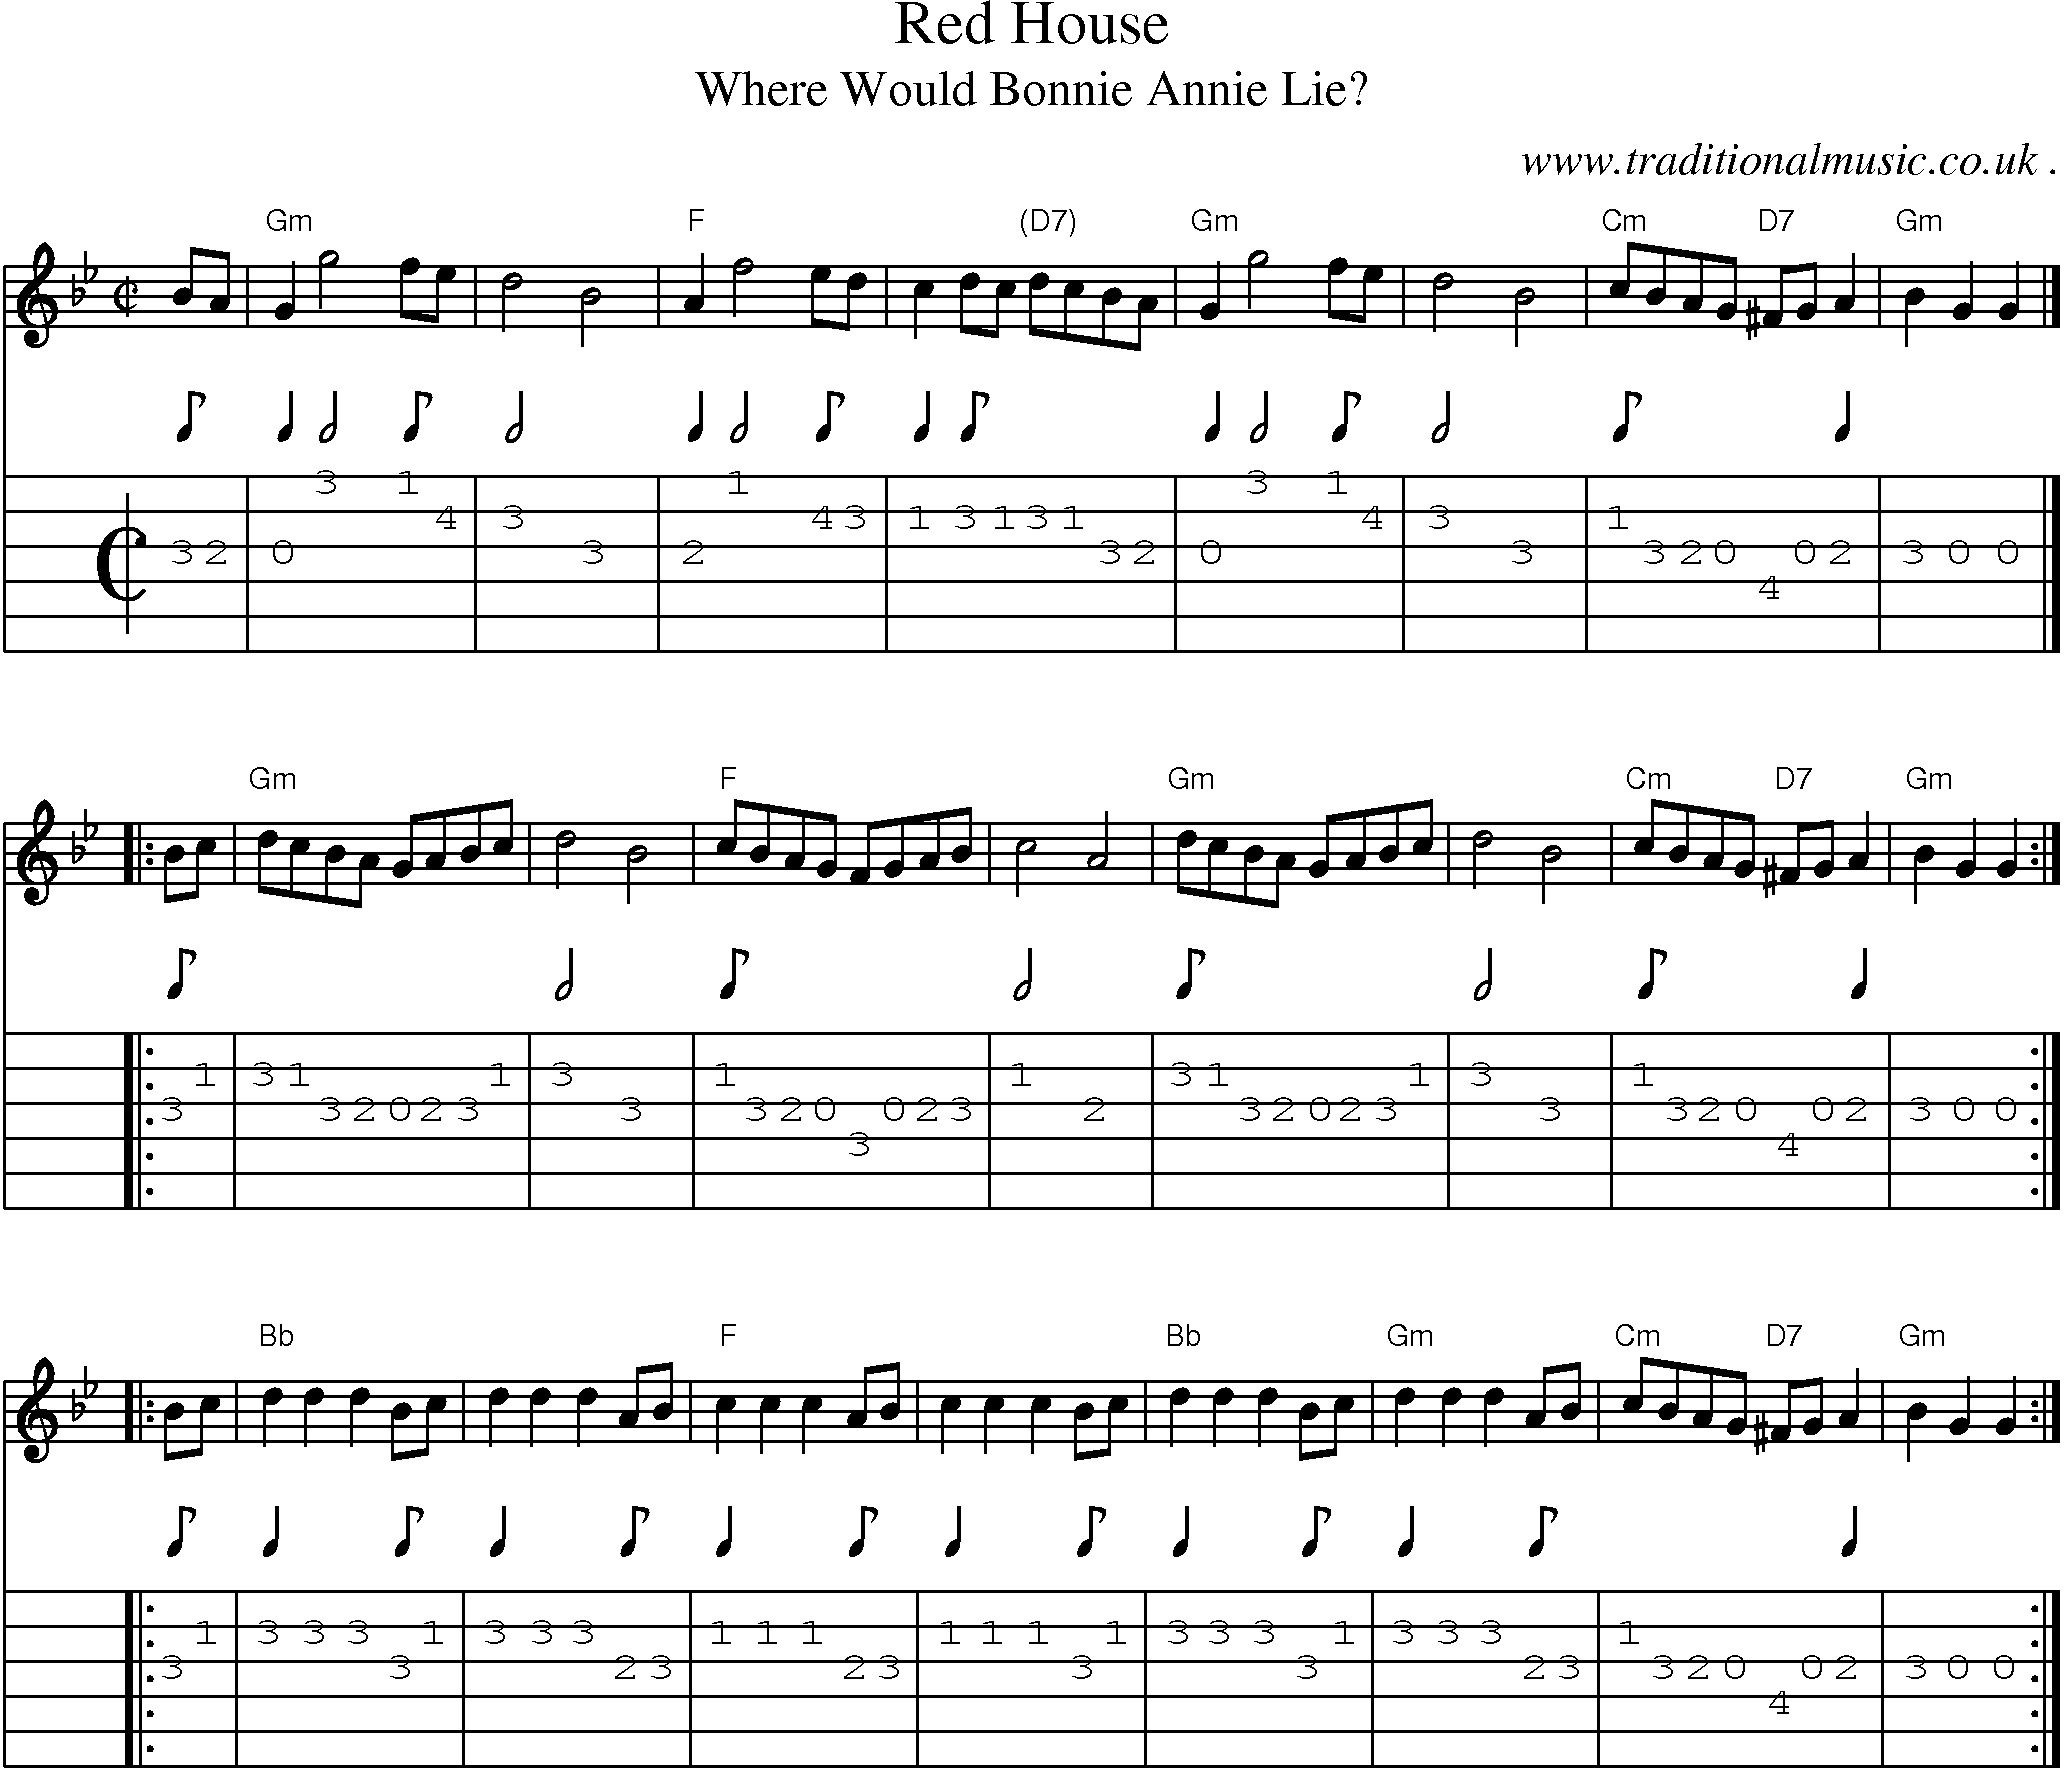 Sheet-music  score, Chords and Guitar Tabs for Red House